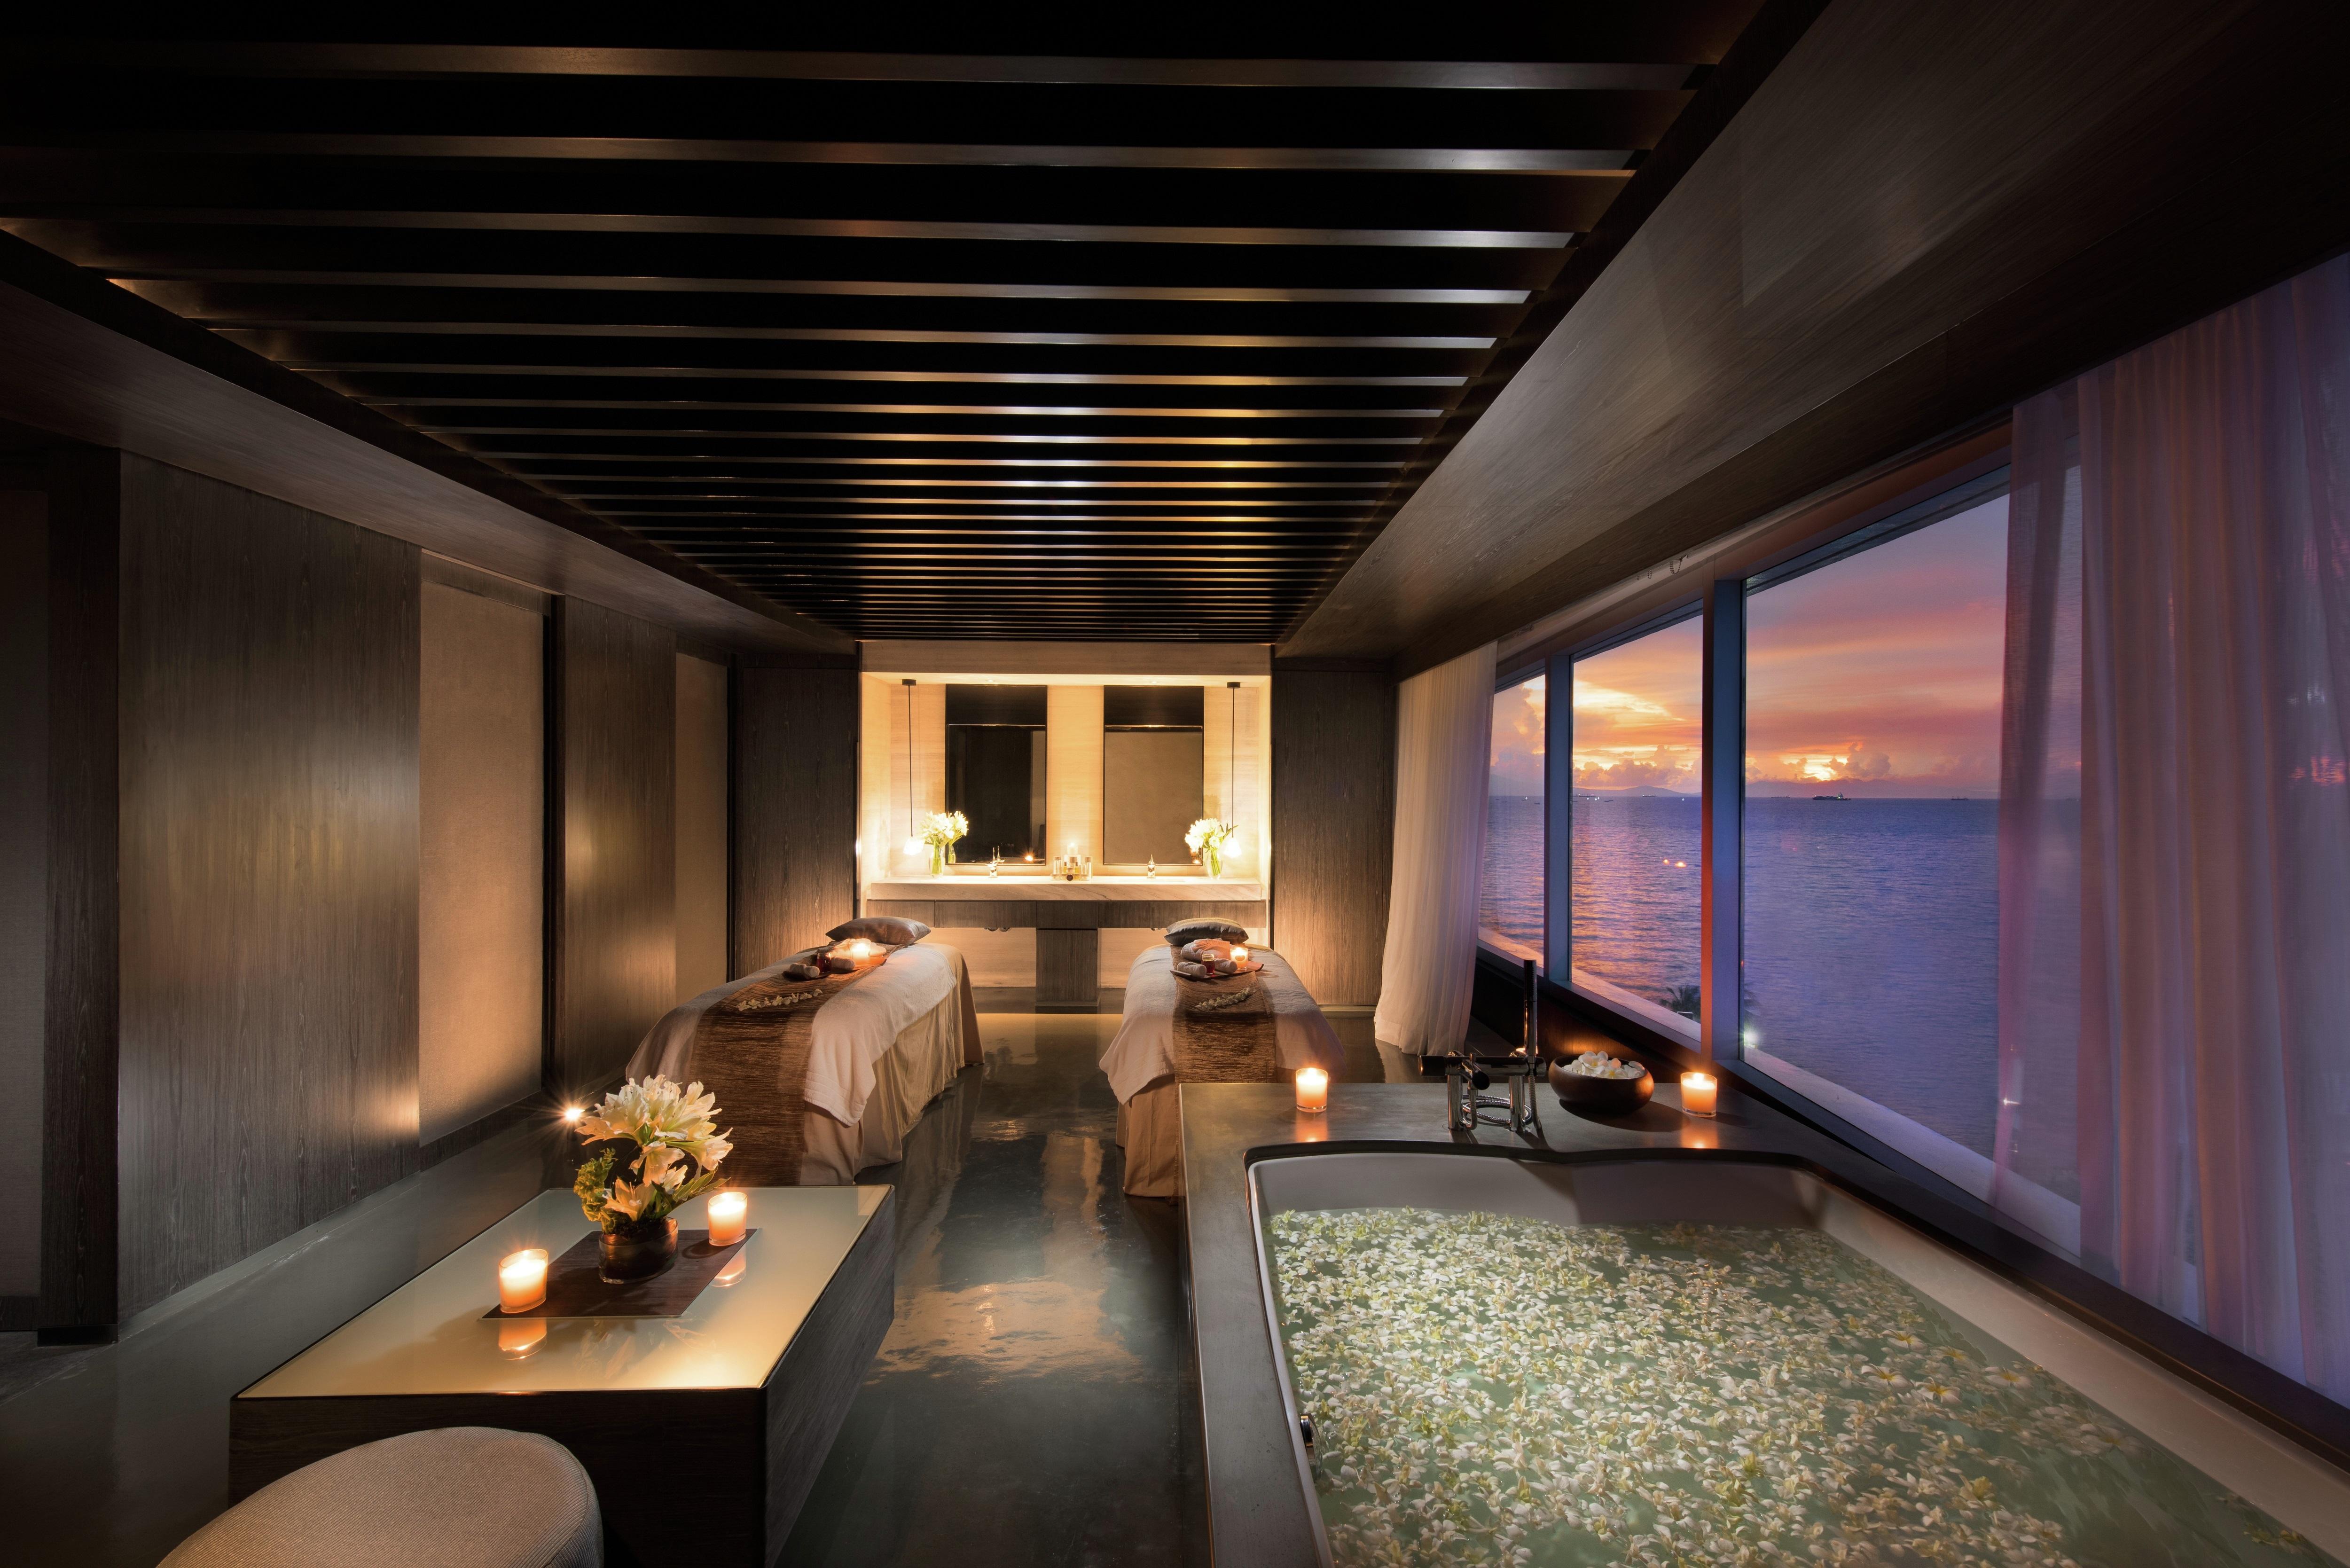 A beautiful spa treatment room with large window overlooking the ocean at sunset.